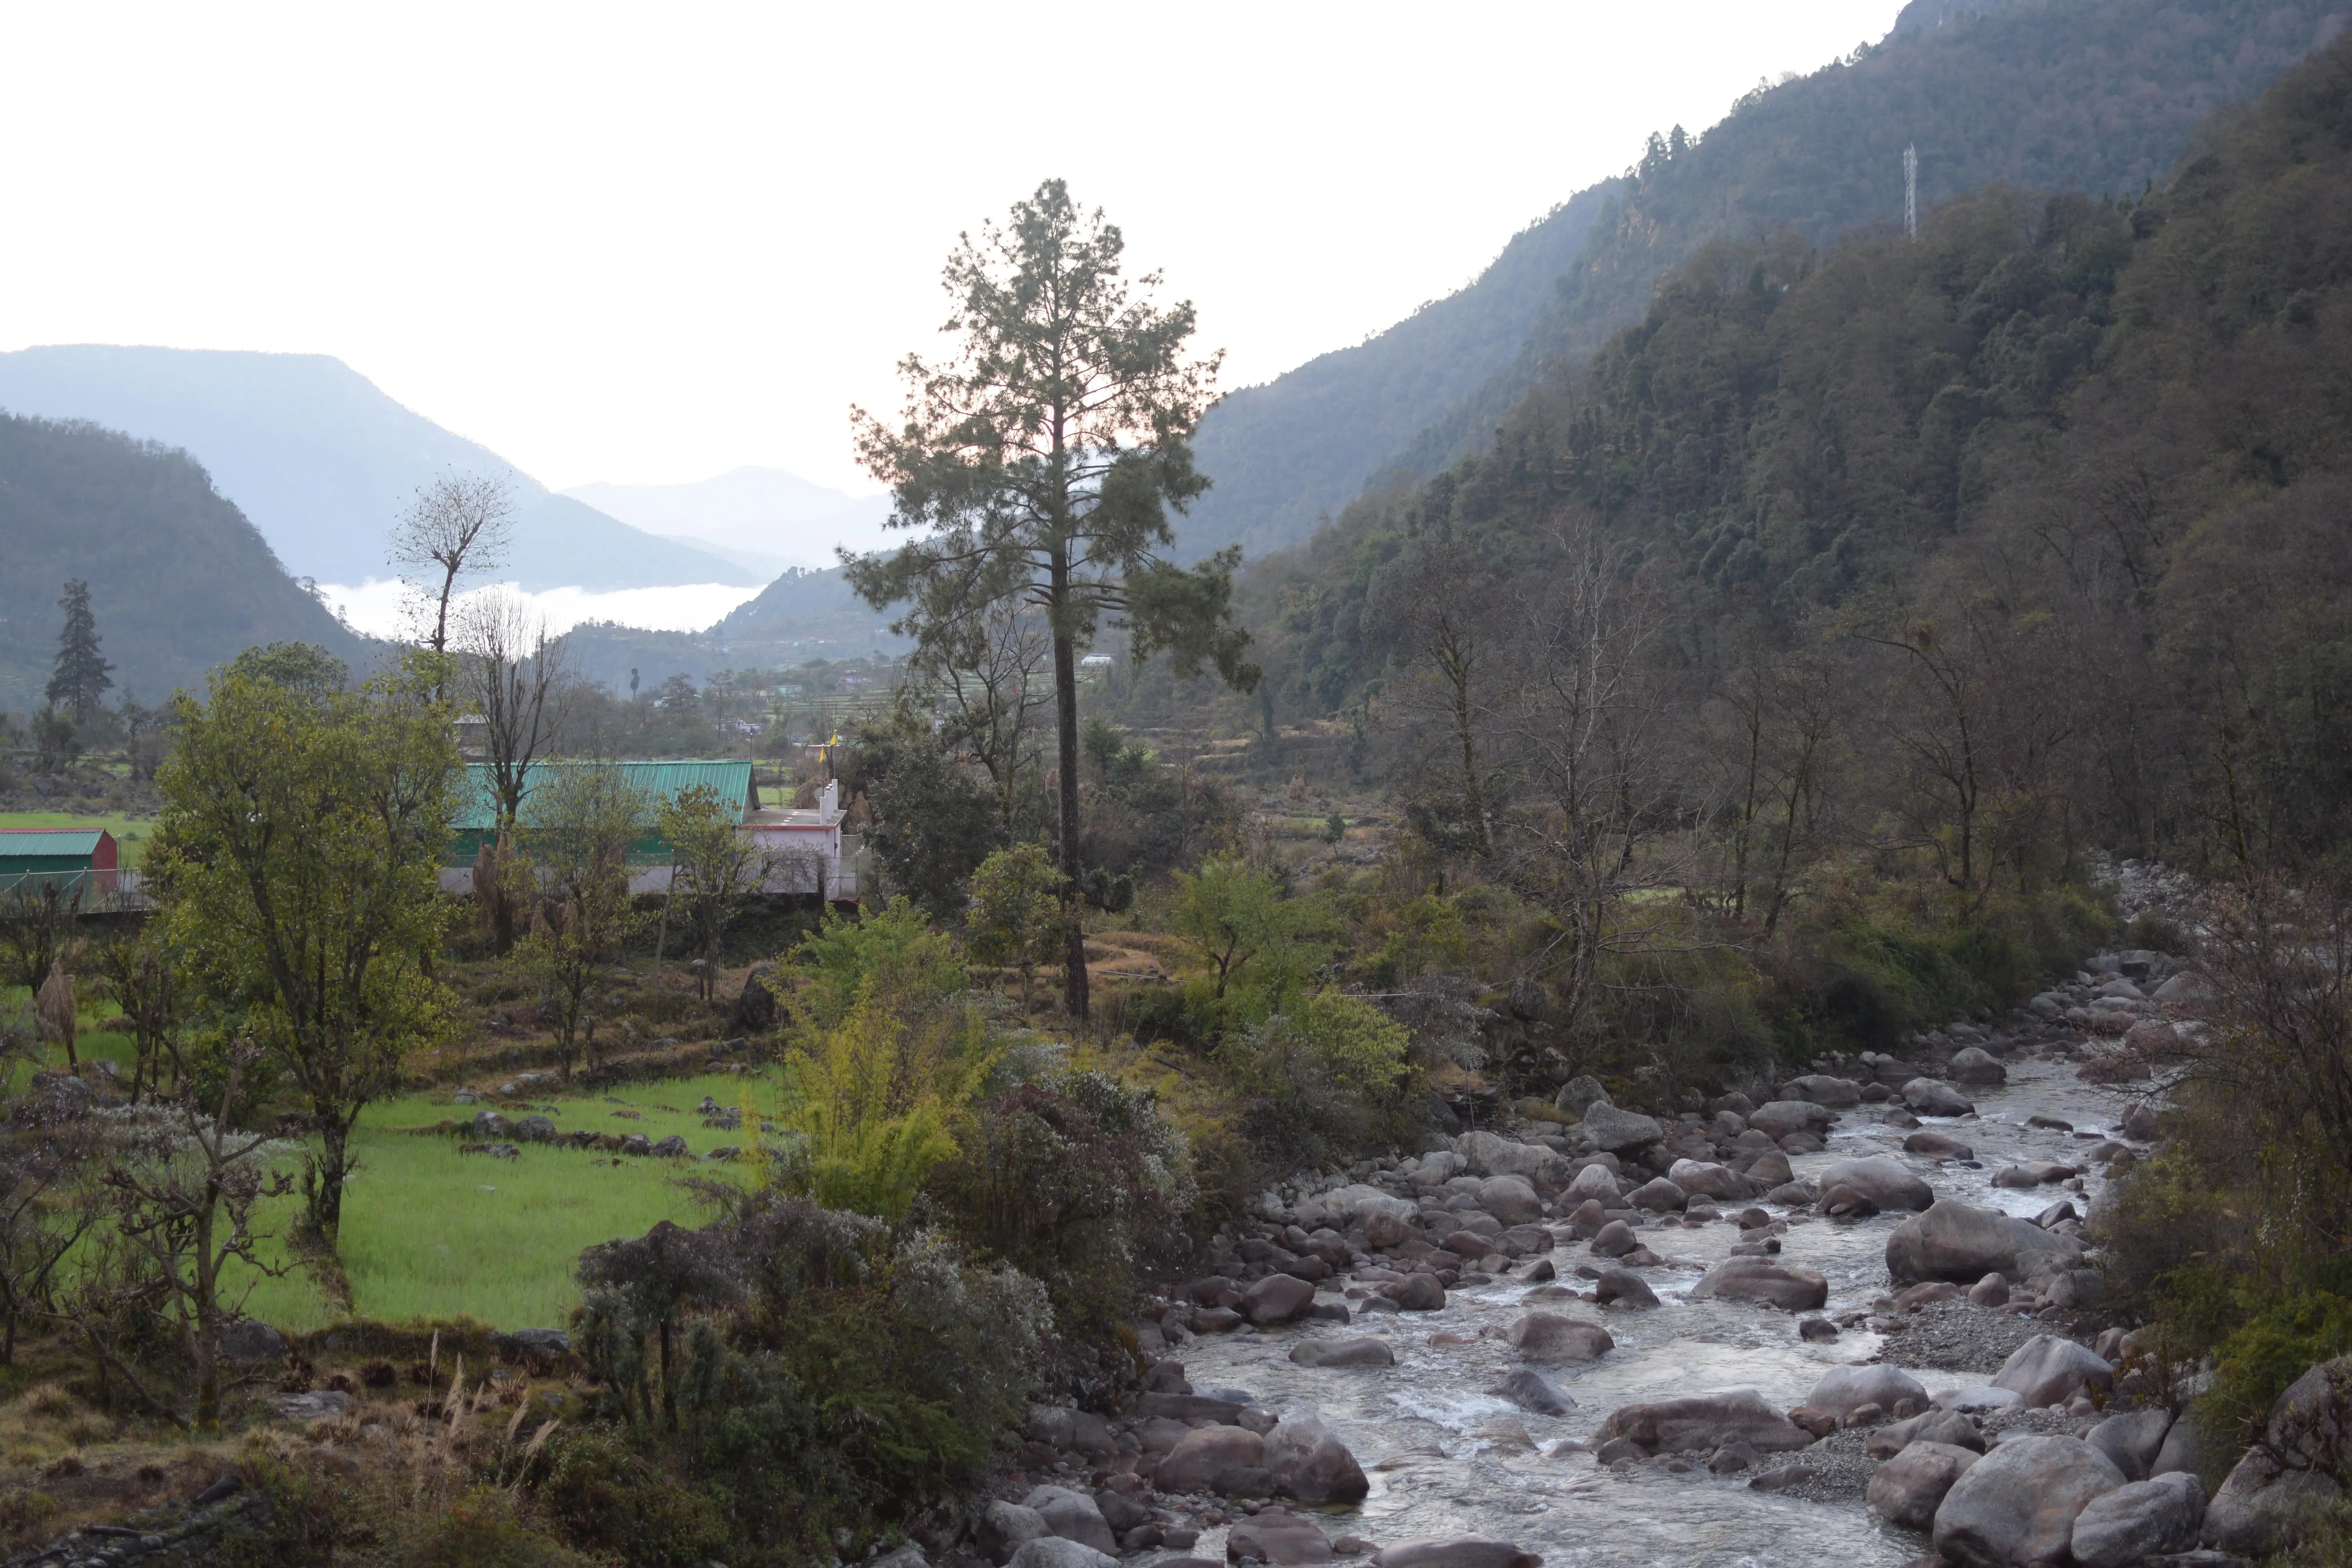 River, forest, water, IMFN, india, himalaya